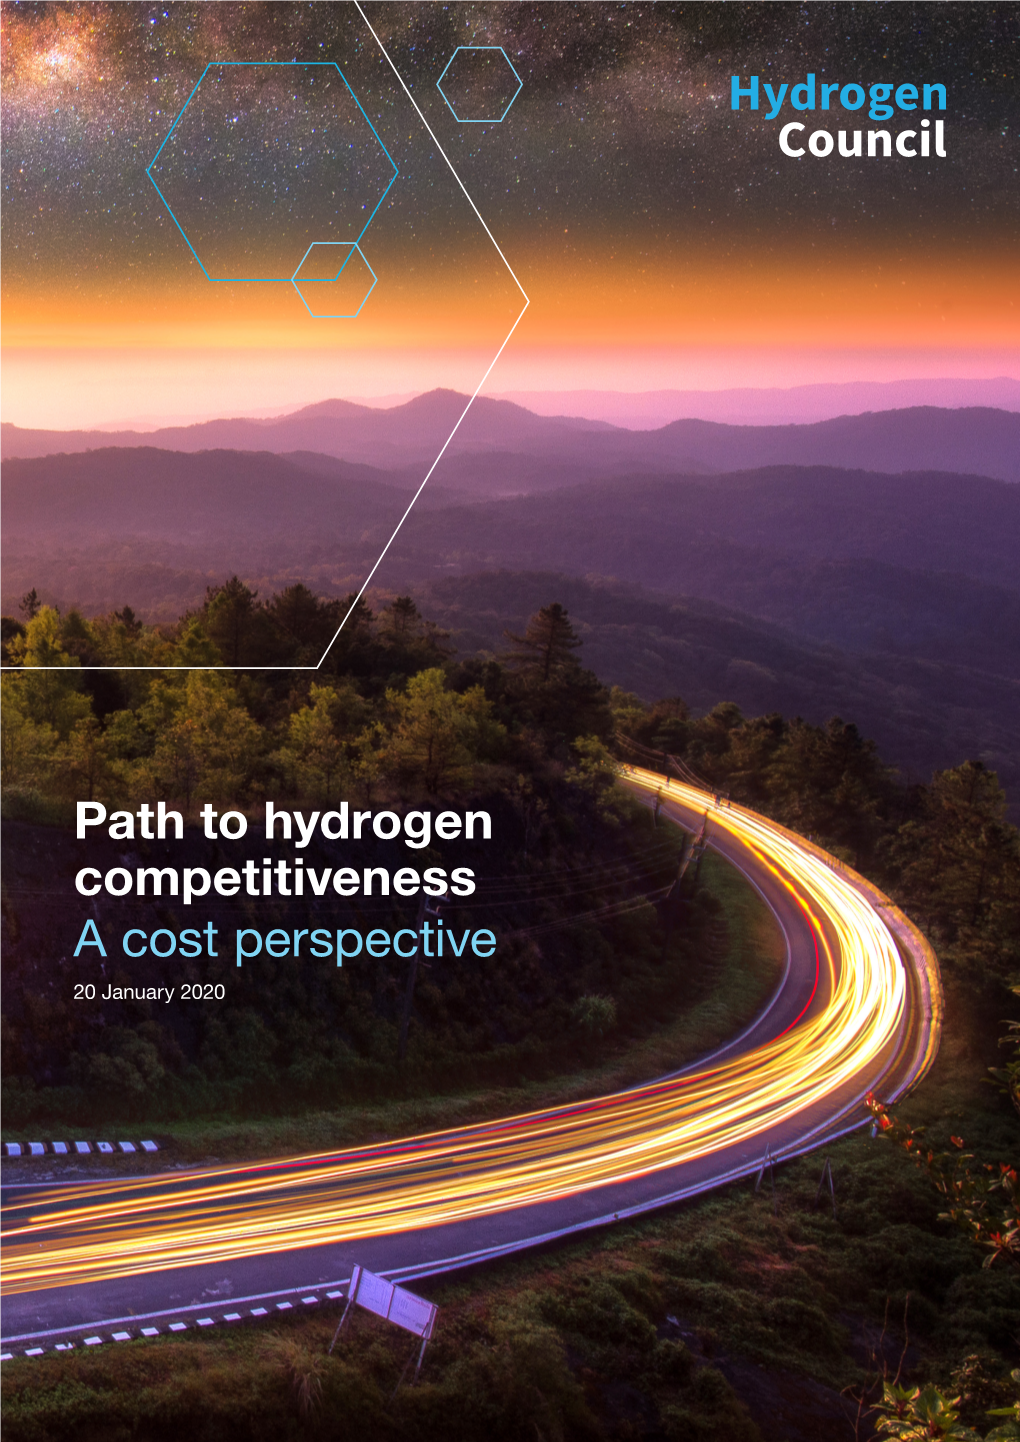 Path to Hydrogen Competitiveness a Cost Perspective 20 January 2020 Published in January 2020 by the Hydrogen Council